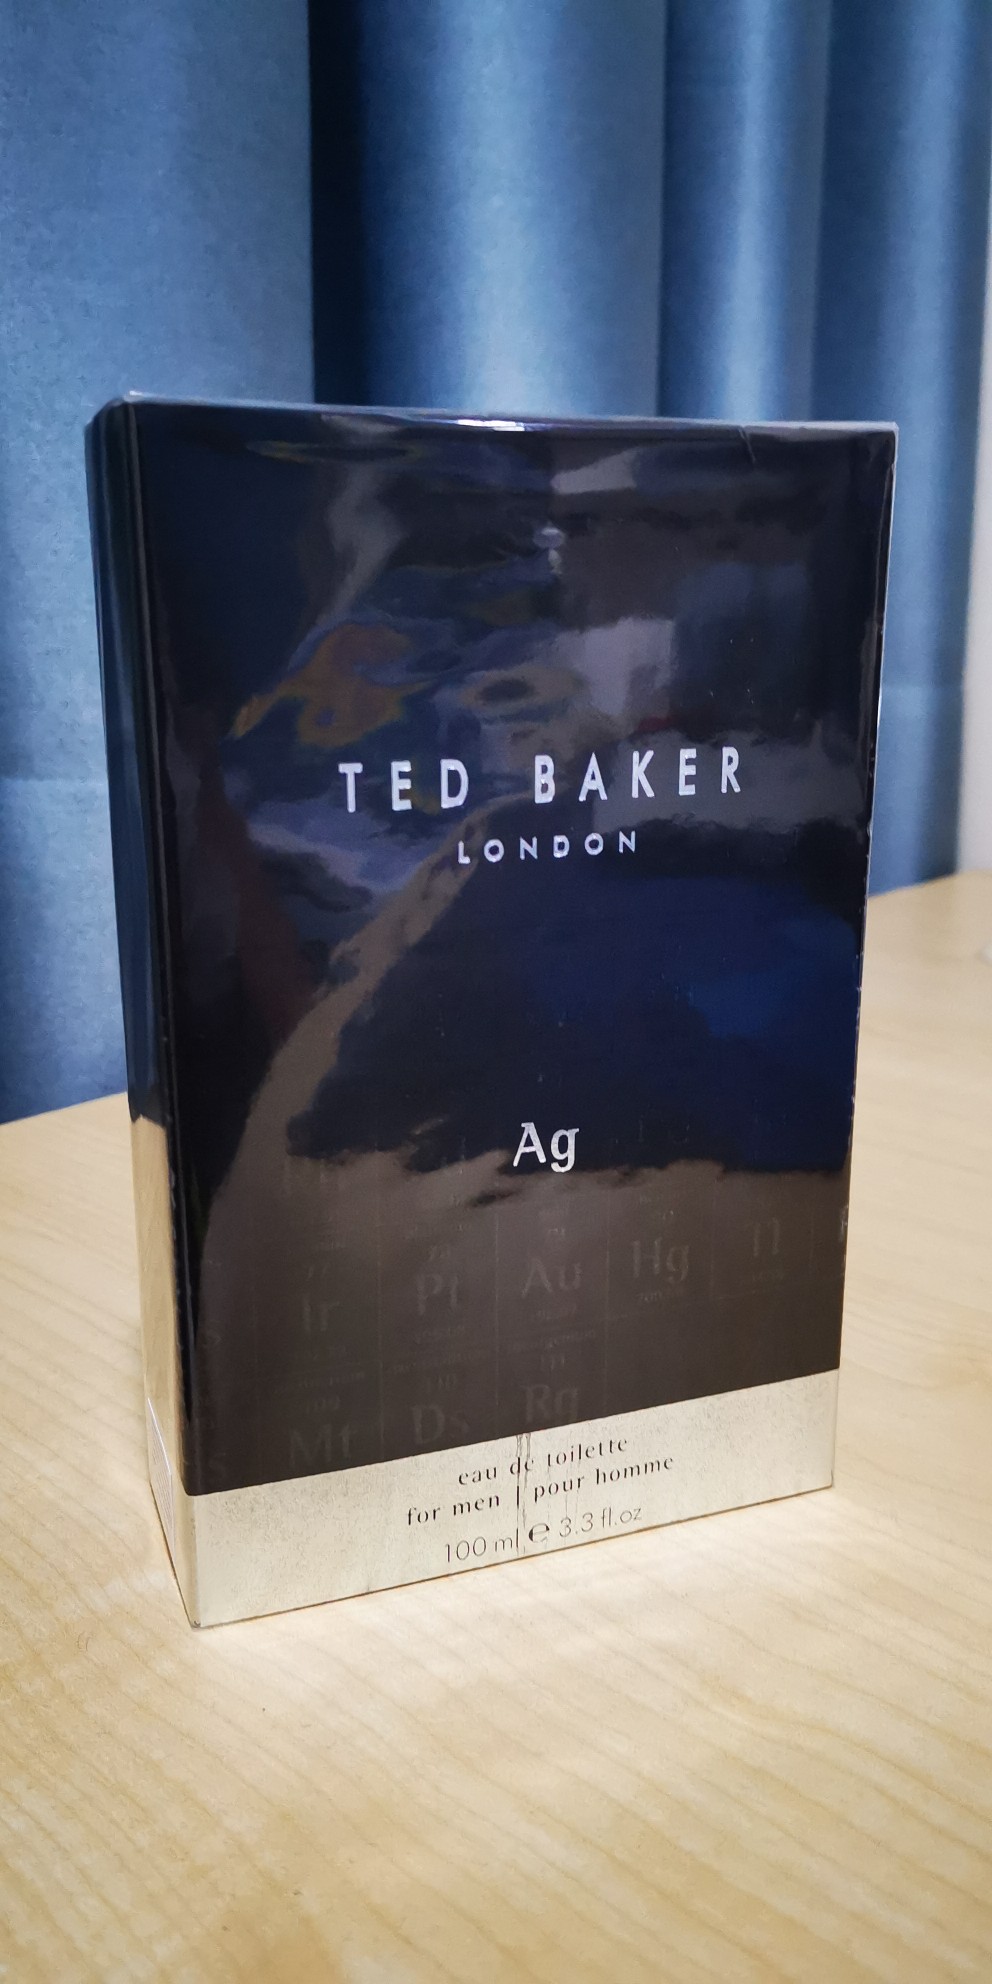 Ted Baker Tonic Au Gold EDT 100ml –